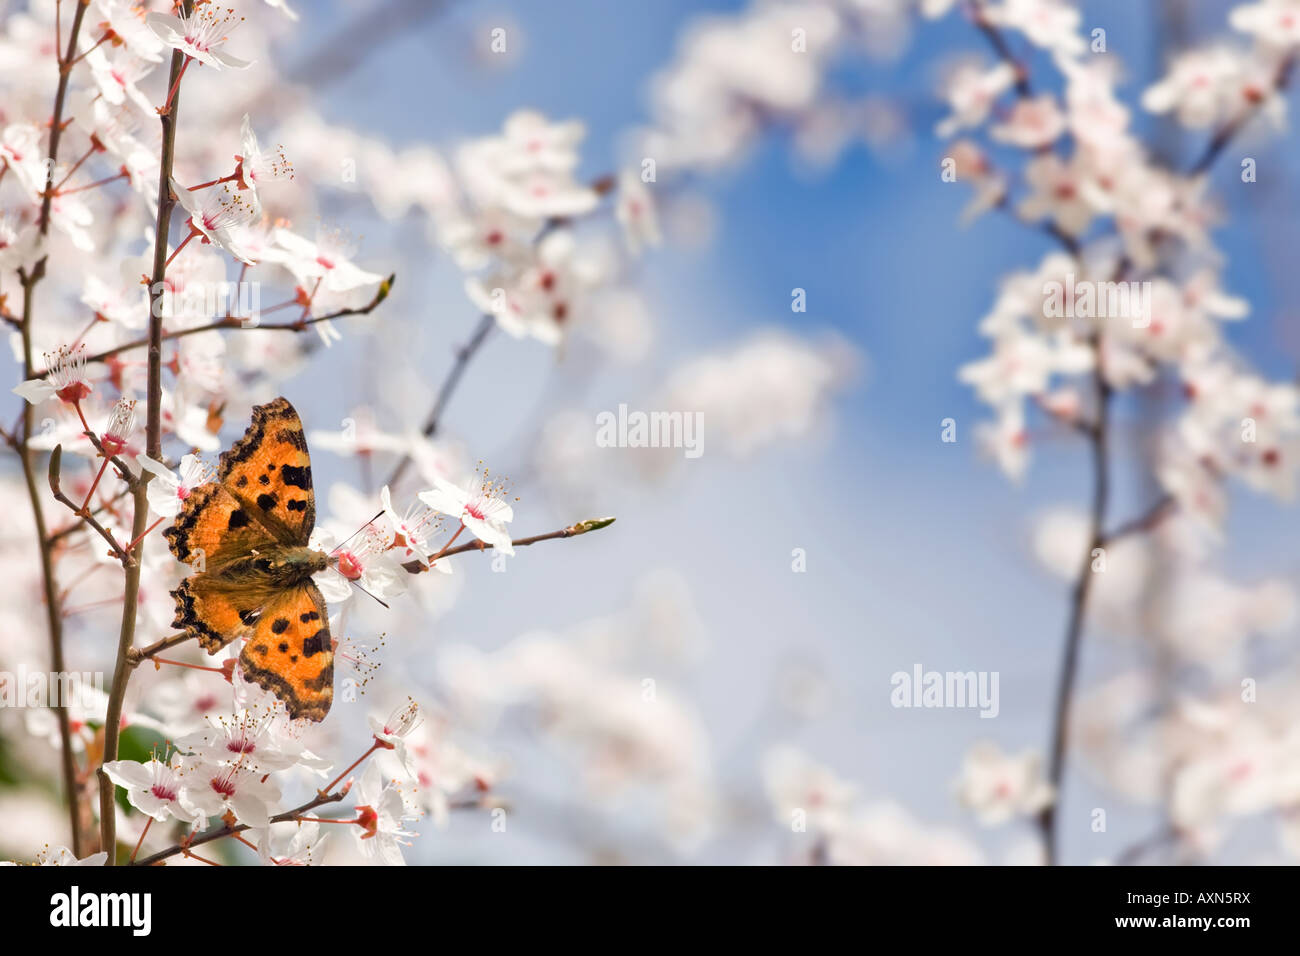 Nymphalis polychloros butterfly on plum tree flowers at springtime Stock Photo